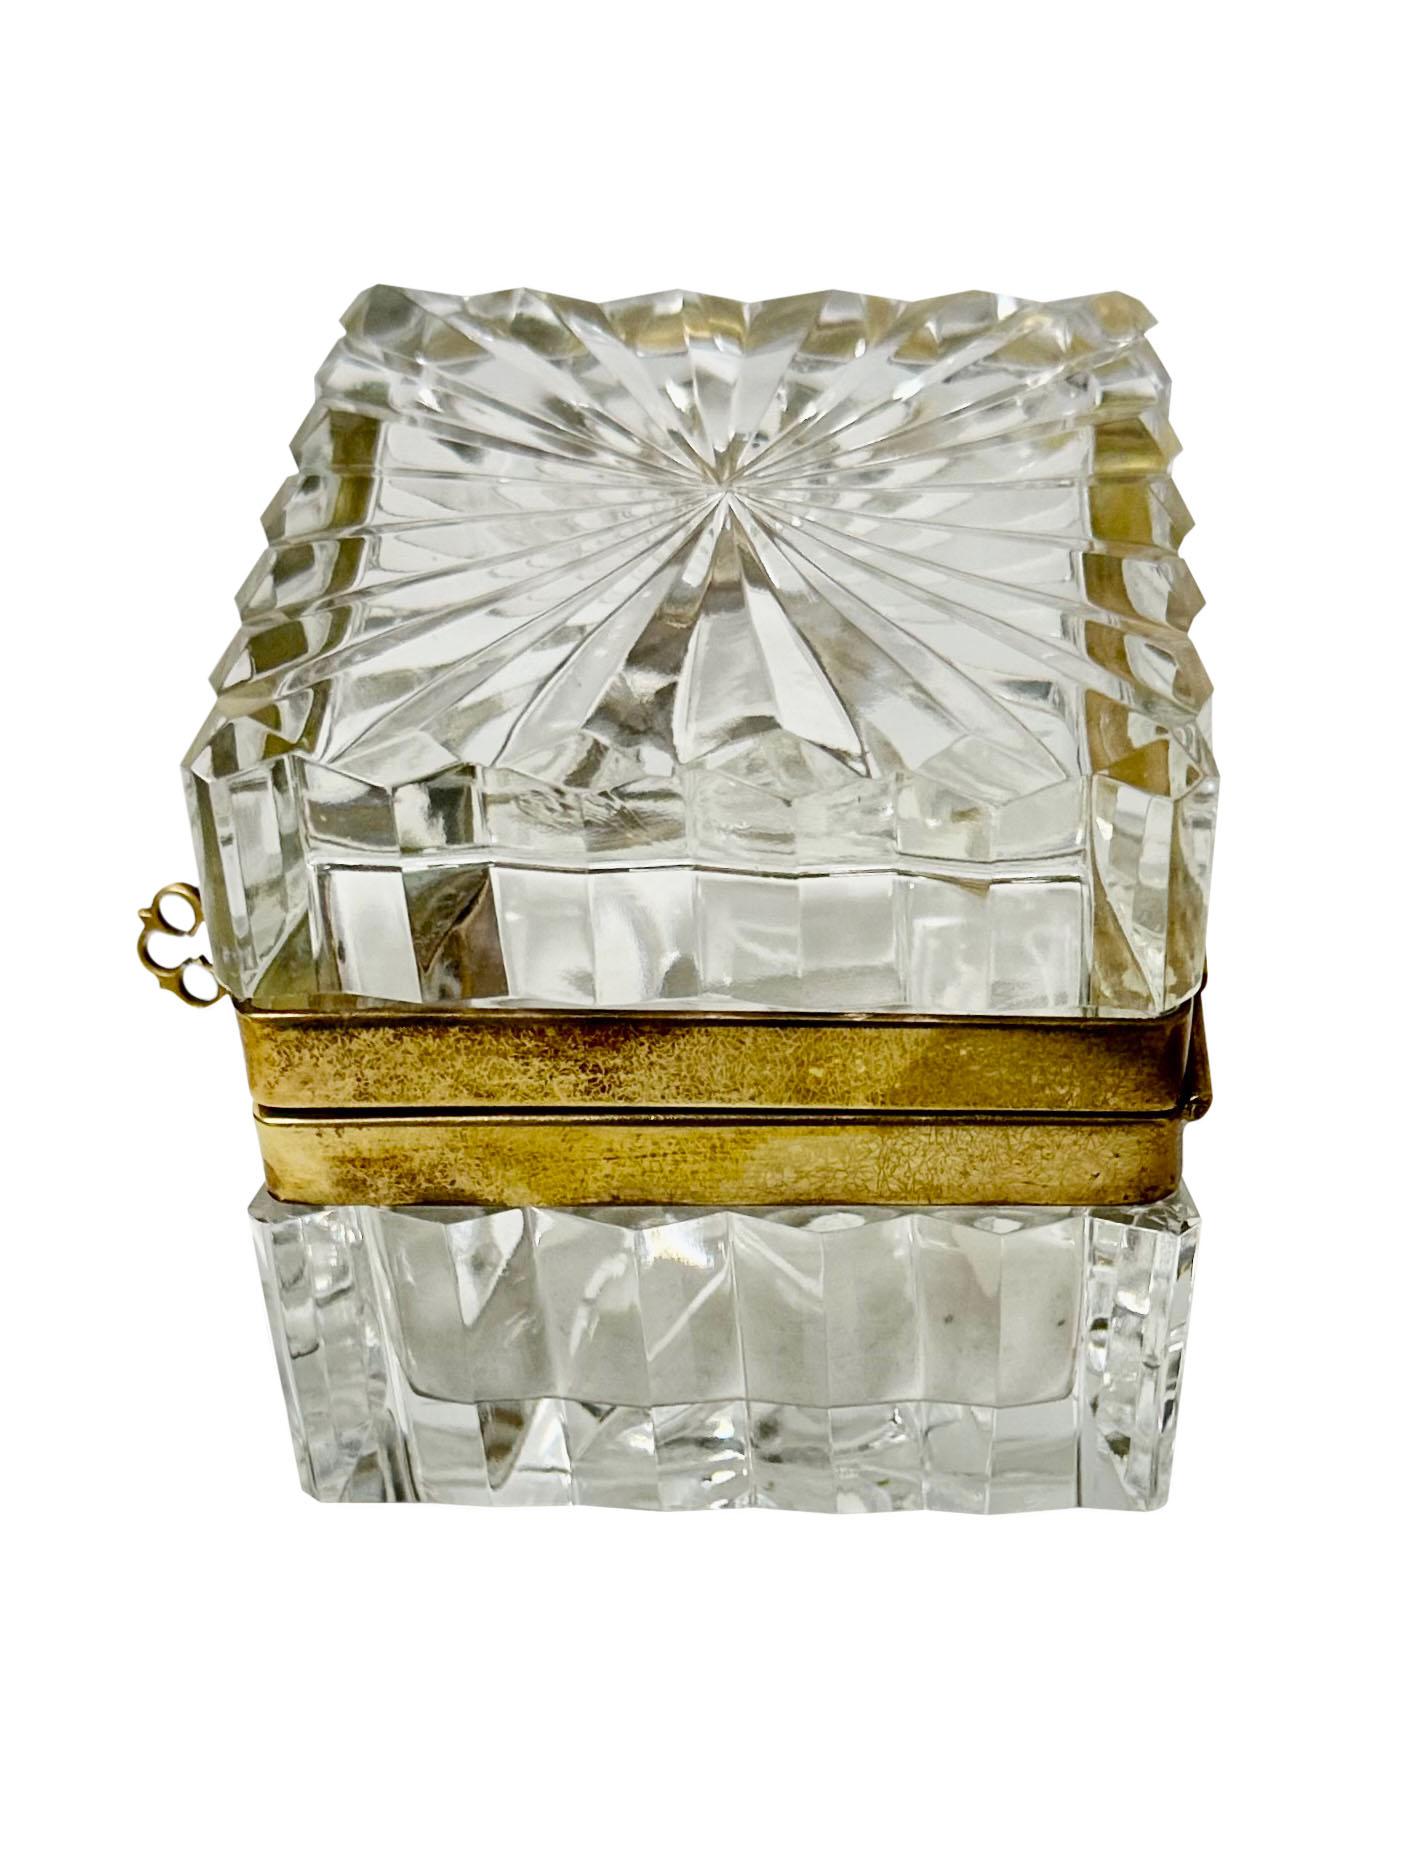 Late 19th Century French Baccarat Crystal Box